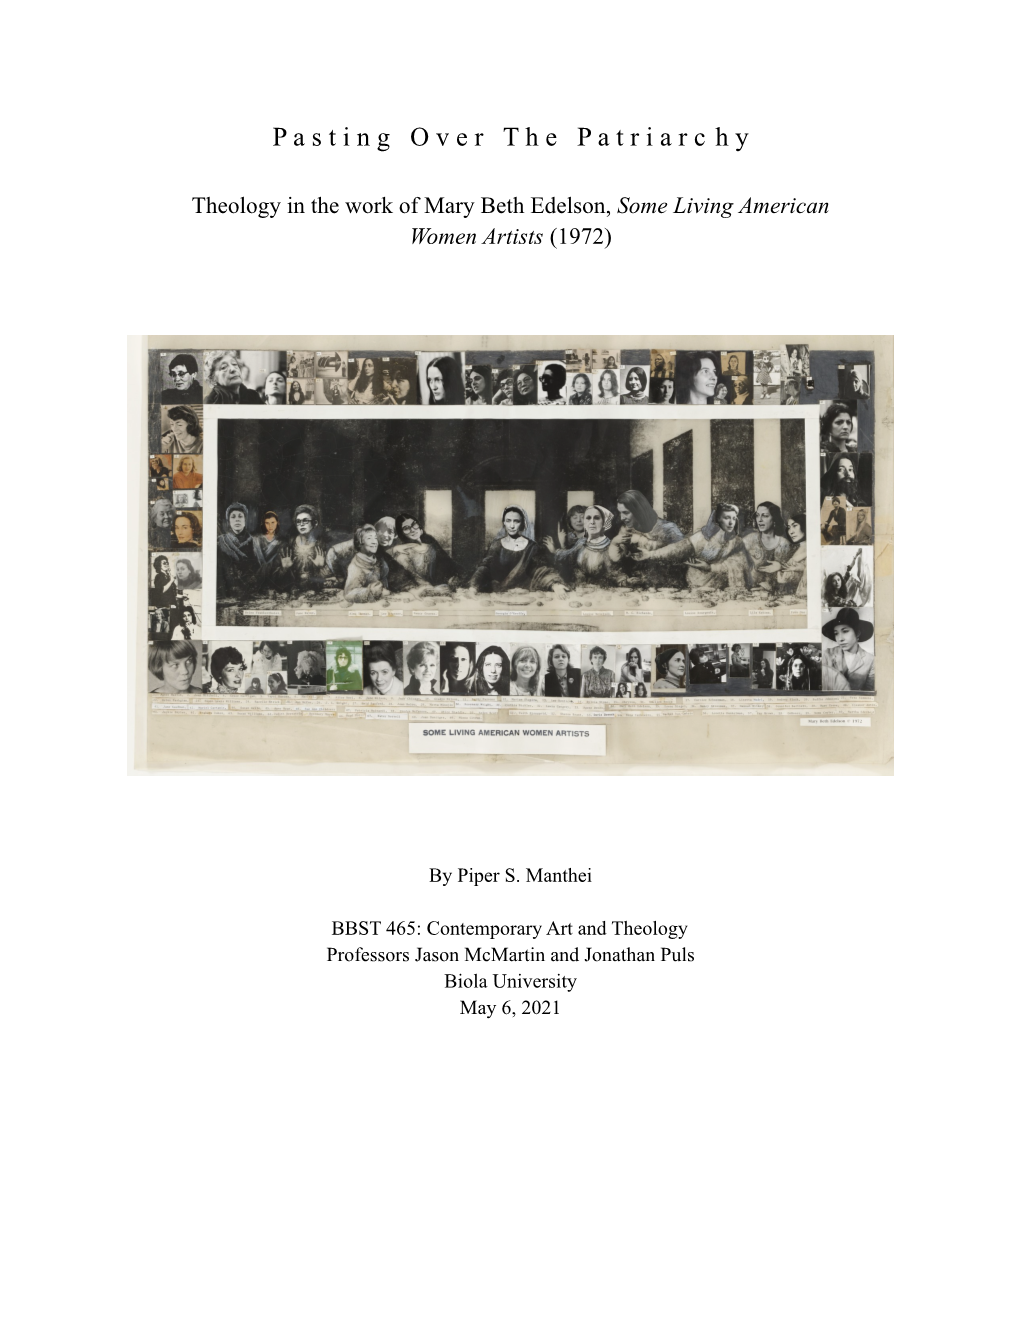 Theology in the Work of Mary Beth Edelson, Some Living American Women Artists (1972)